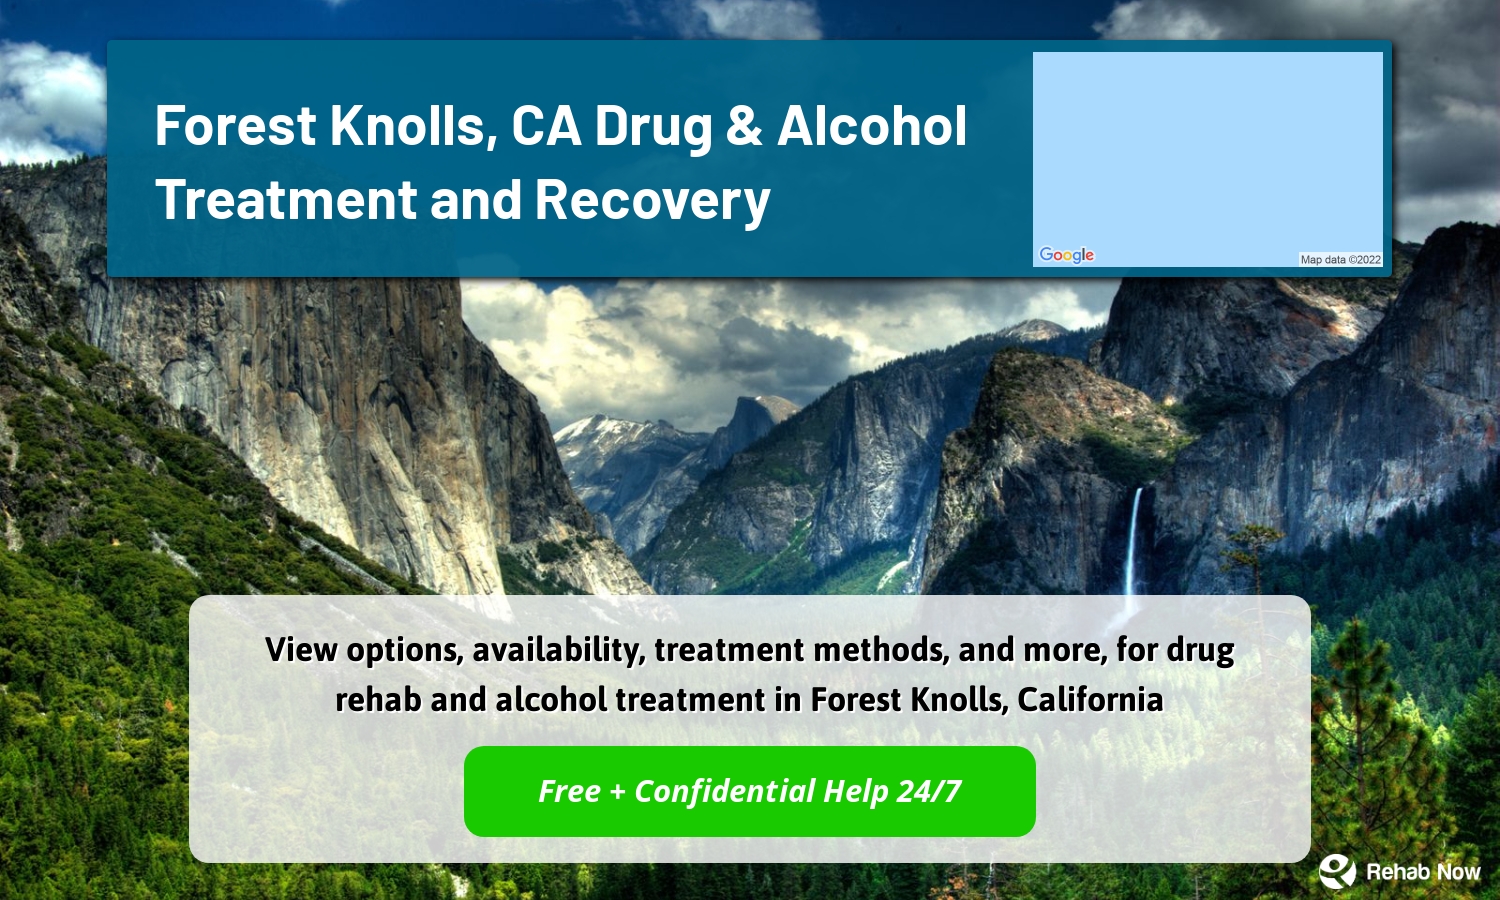 View options, availability, treatment methods, and more, for drug rehab and alcohol treatment in Forest Knolls, California